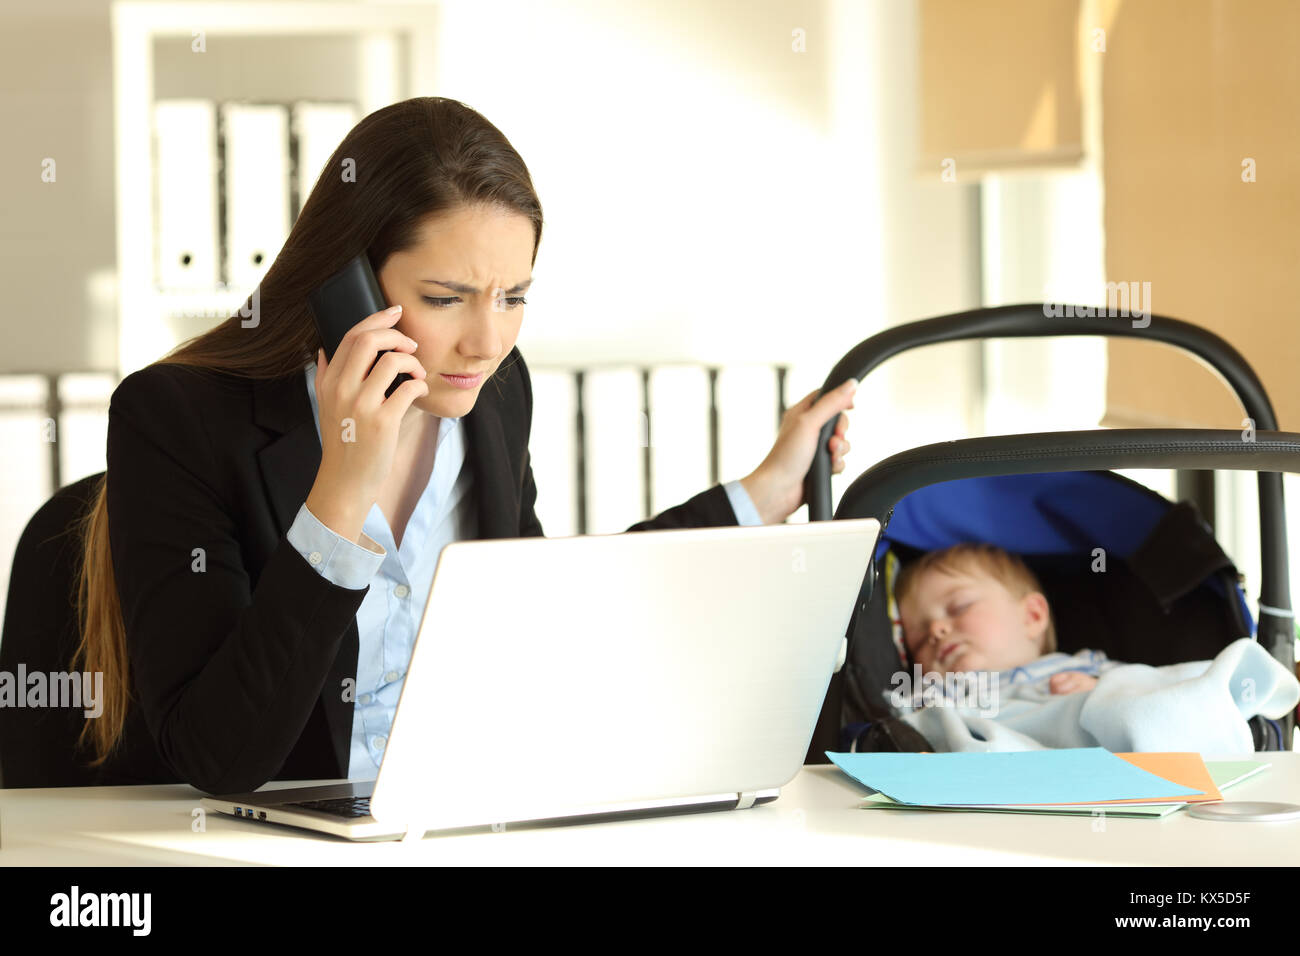 Stressed mother working attending a phone call and taking care of her baby at office Stock Photo